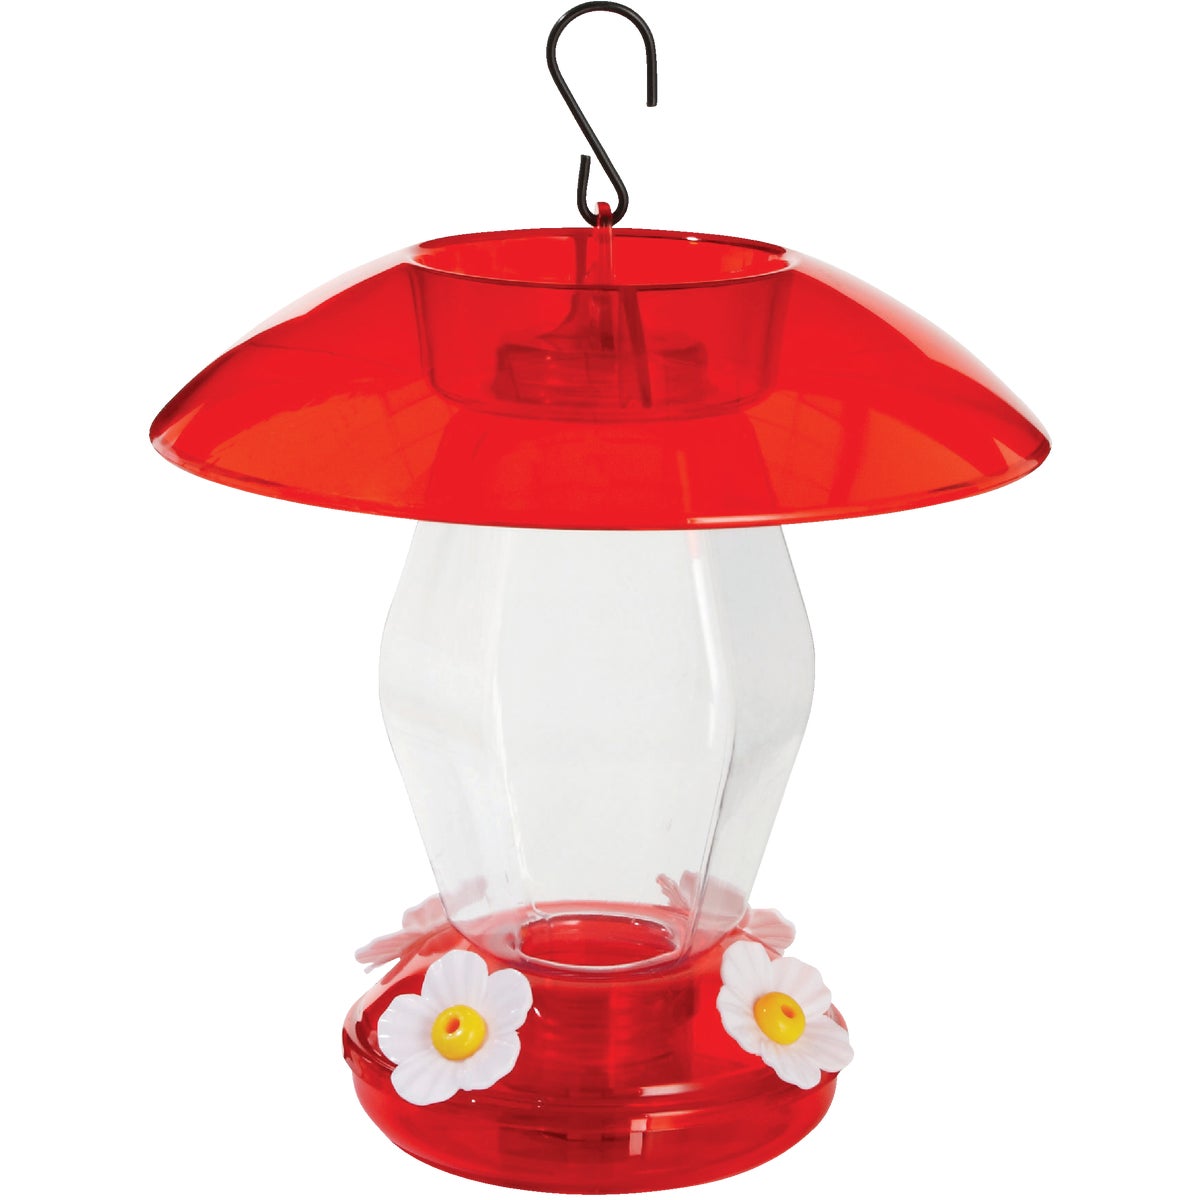 Item 702345, Hummingbird feeder with large, red roof.